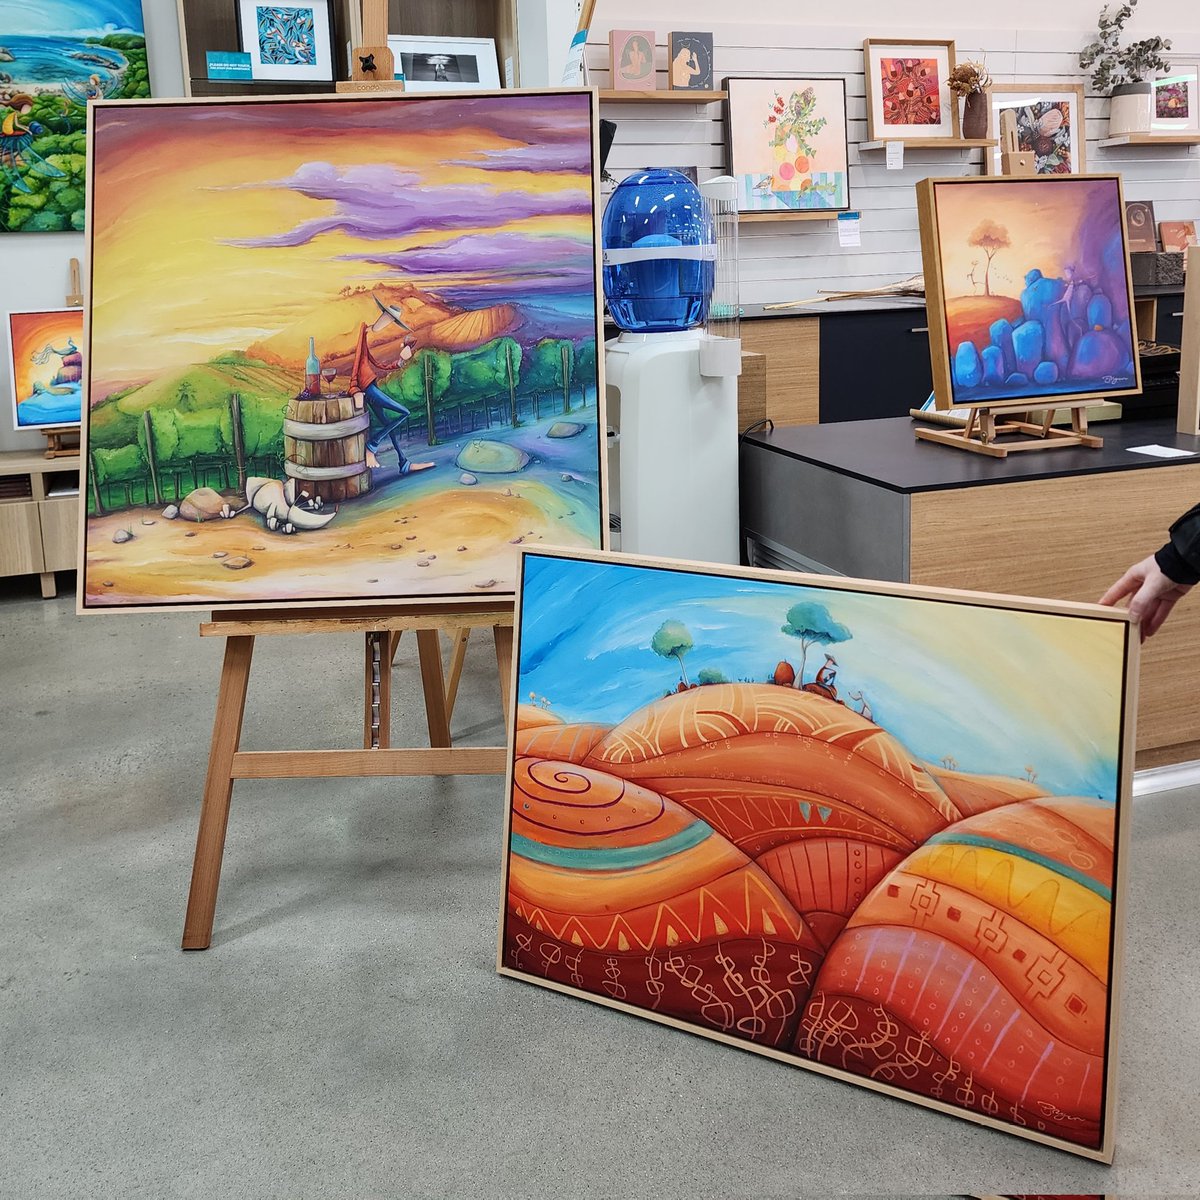 Signing new prints at Arts Edge Gallery...nice surprise of new sales after popping in to pick up canvas.
'Sundowner' 'Hilltop Hues' 'Dreamcatchers' available peterryanart.com.au/online-shop/ #Australianart #peacock #peterryanart